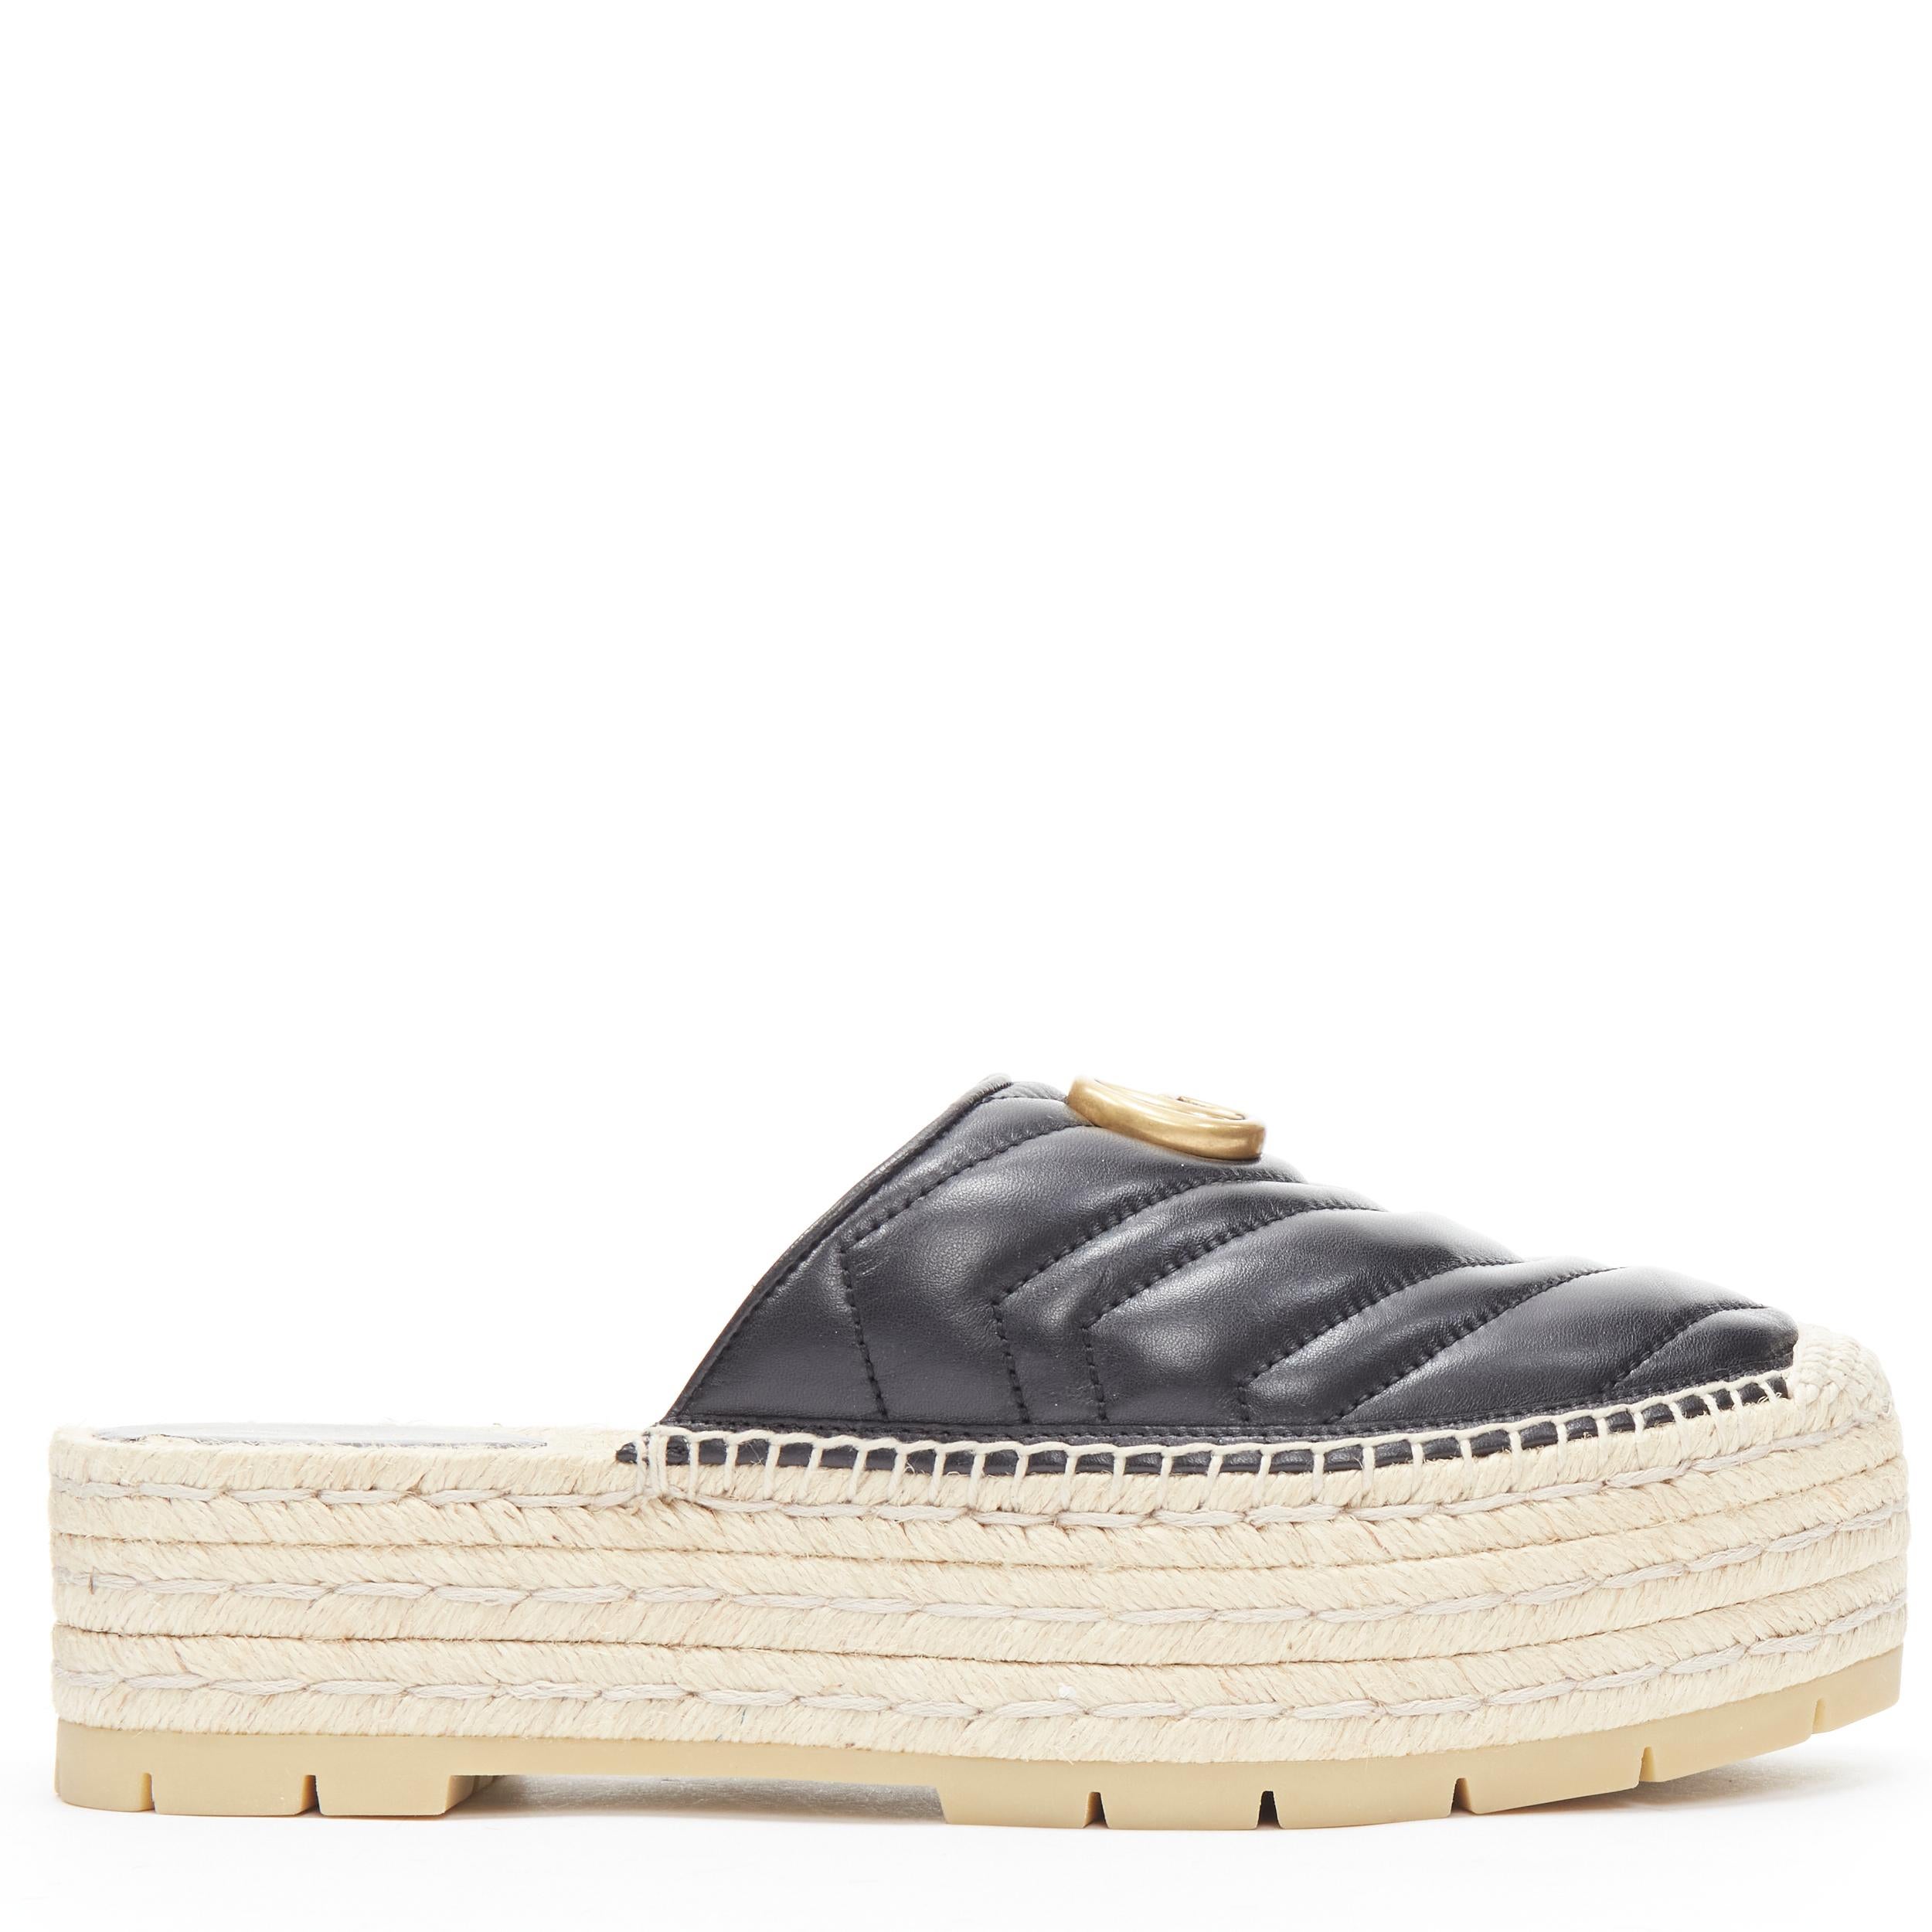 new GUCCI Charlotte Matelasse gold GG logo platform espadrille jute mule EU38.5 
Reference: TGAS/B02163 
Brand: Gucci 
Designer: Alessandro Michele 
Model: Nappa Charlotte 
Material: Leather 
Color: Black 
Pattern: Solid 
Extra Detail: Nappa